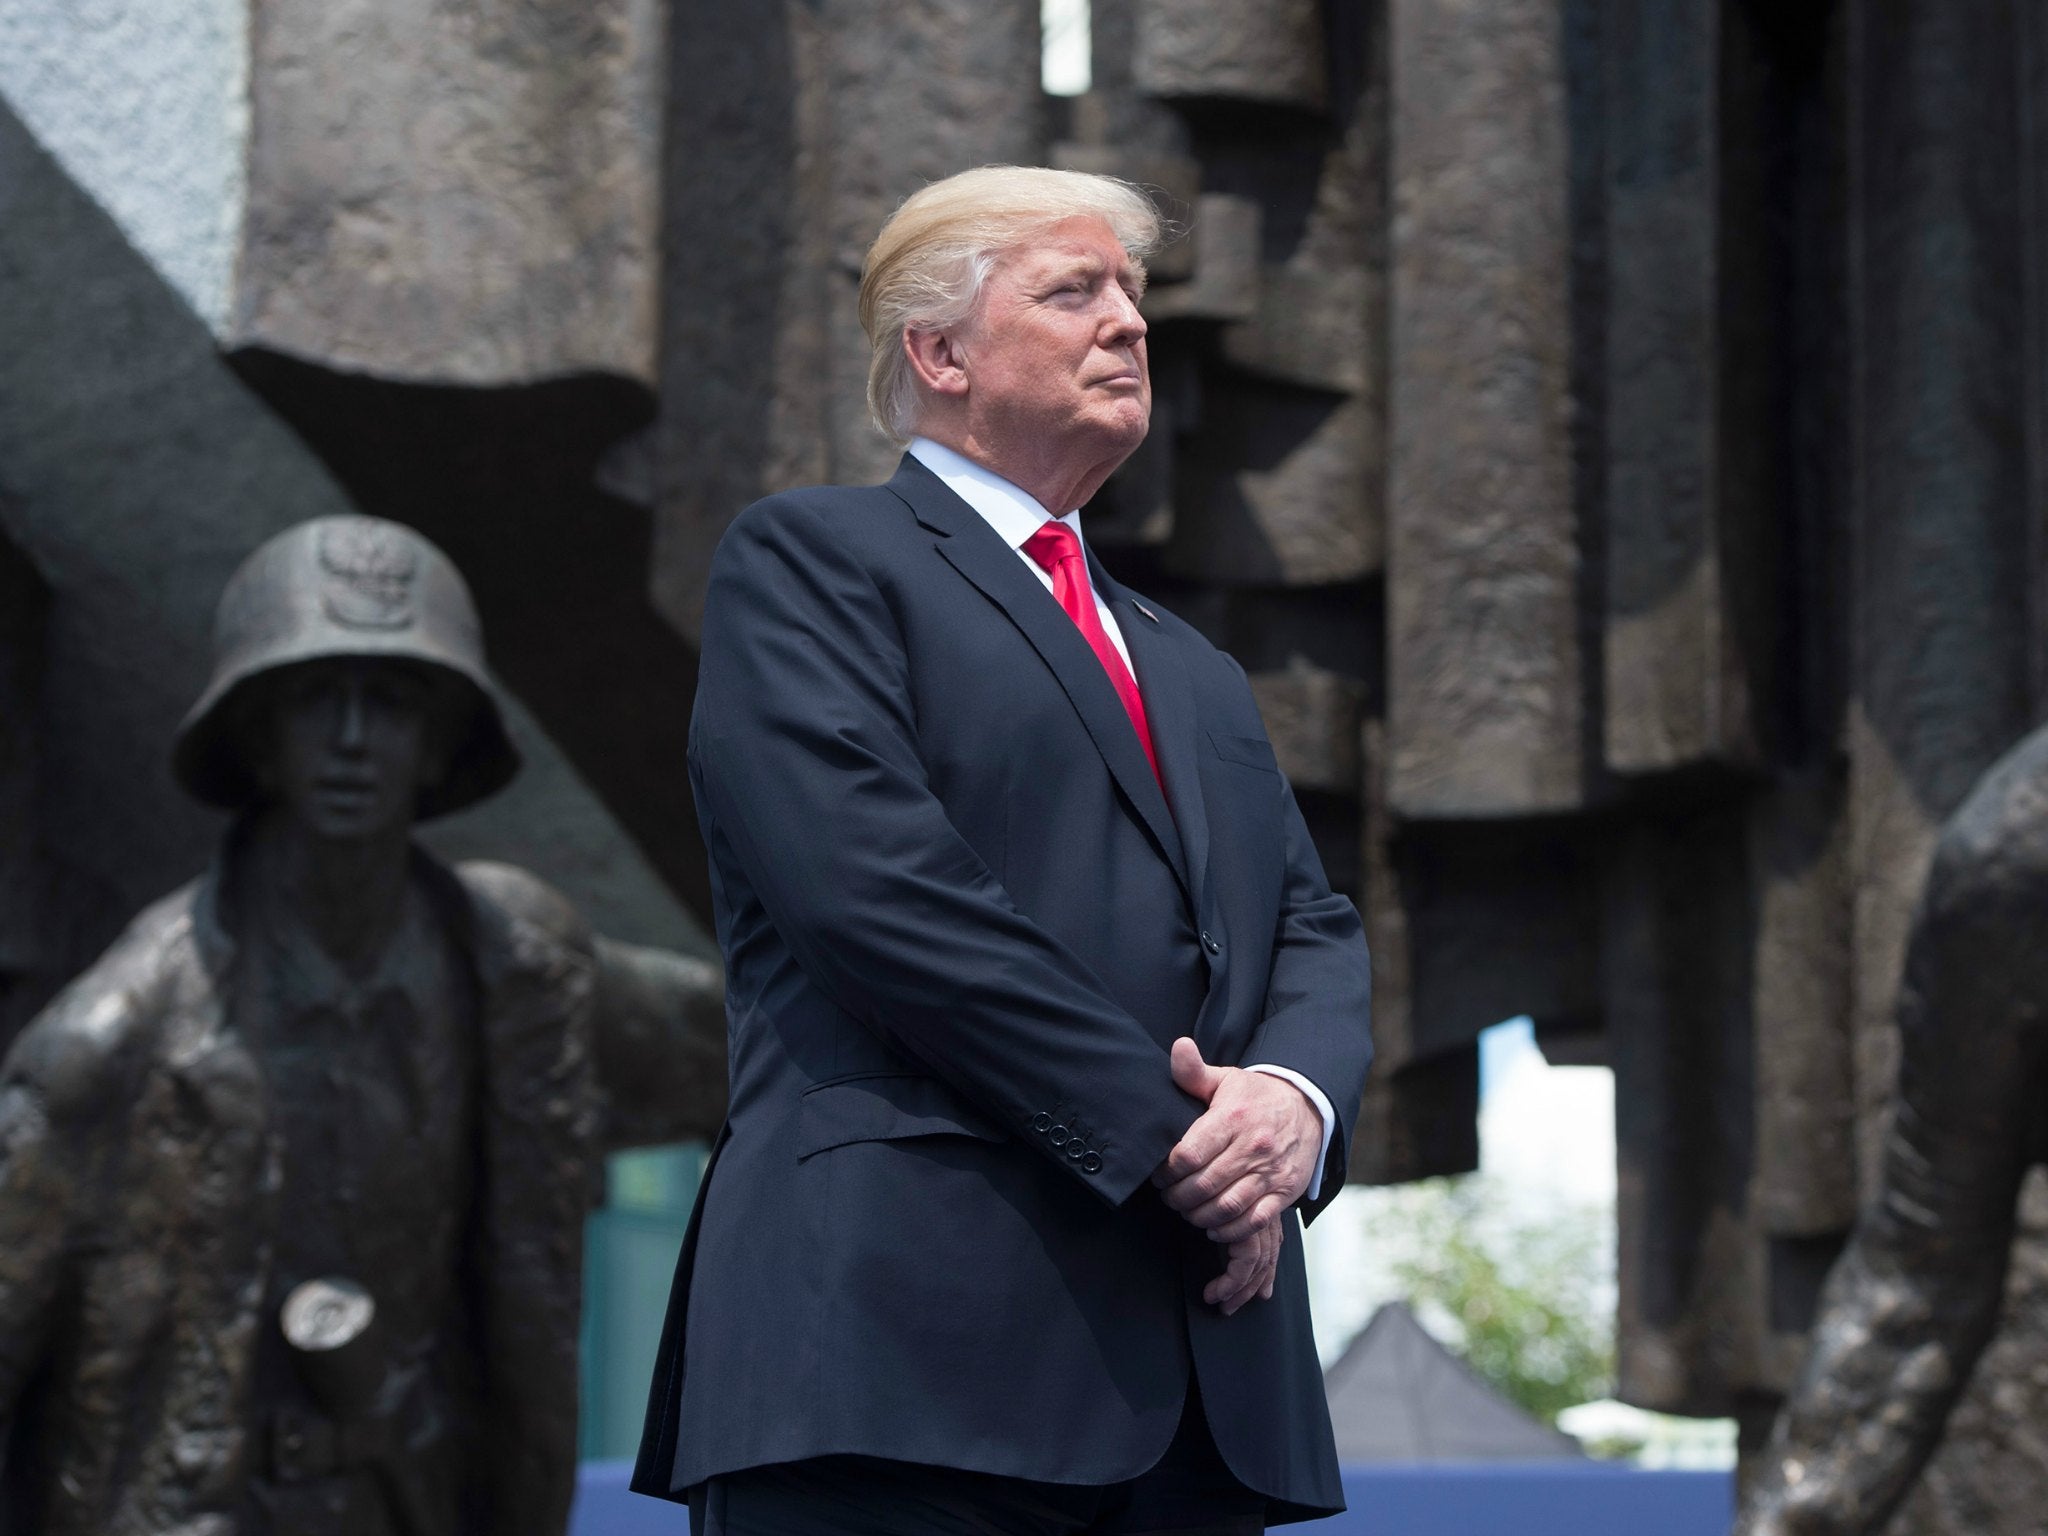 President Donald Trump stands in front of the Warsaw Uprising monument in Krasinski Square ahead of his address